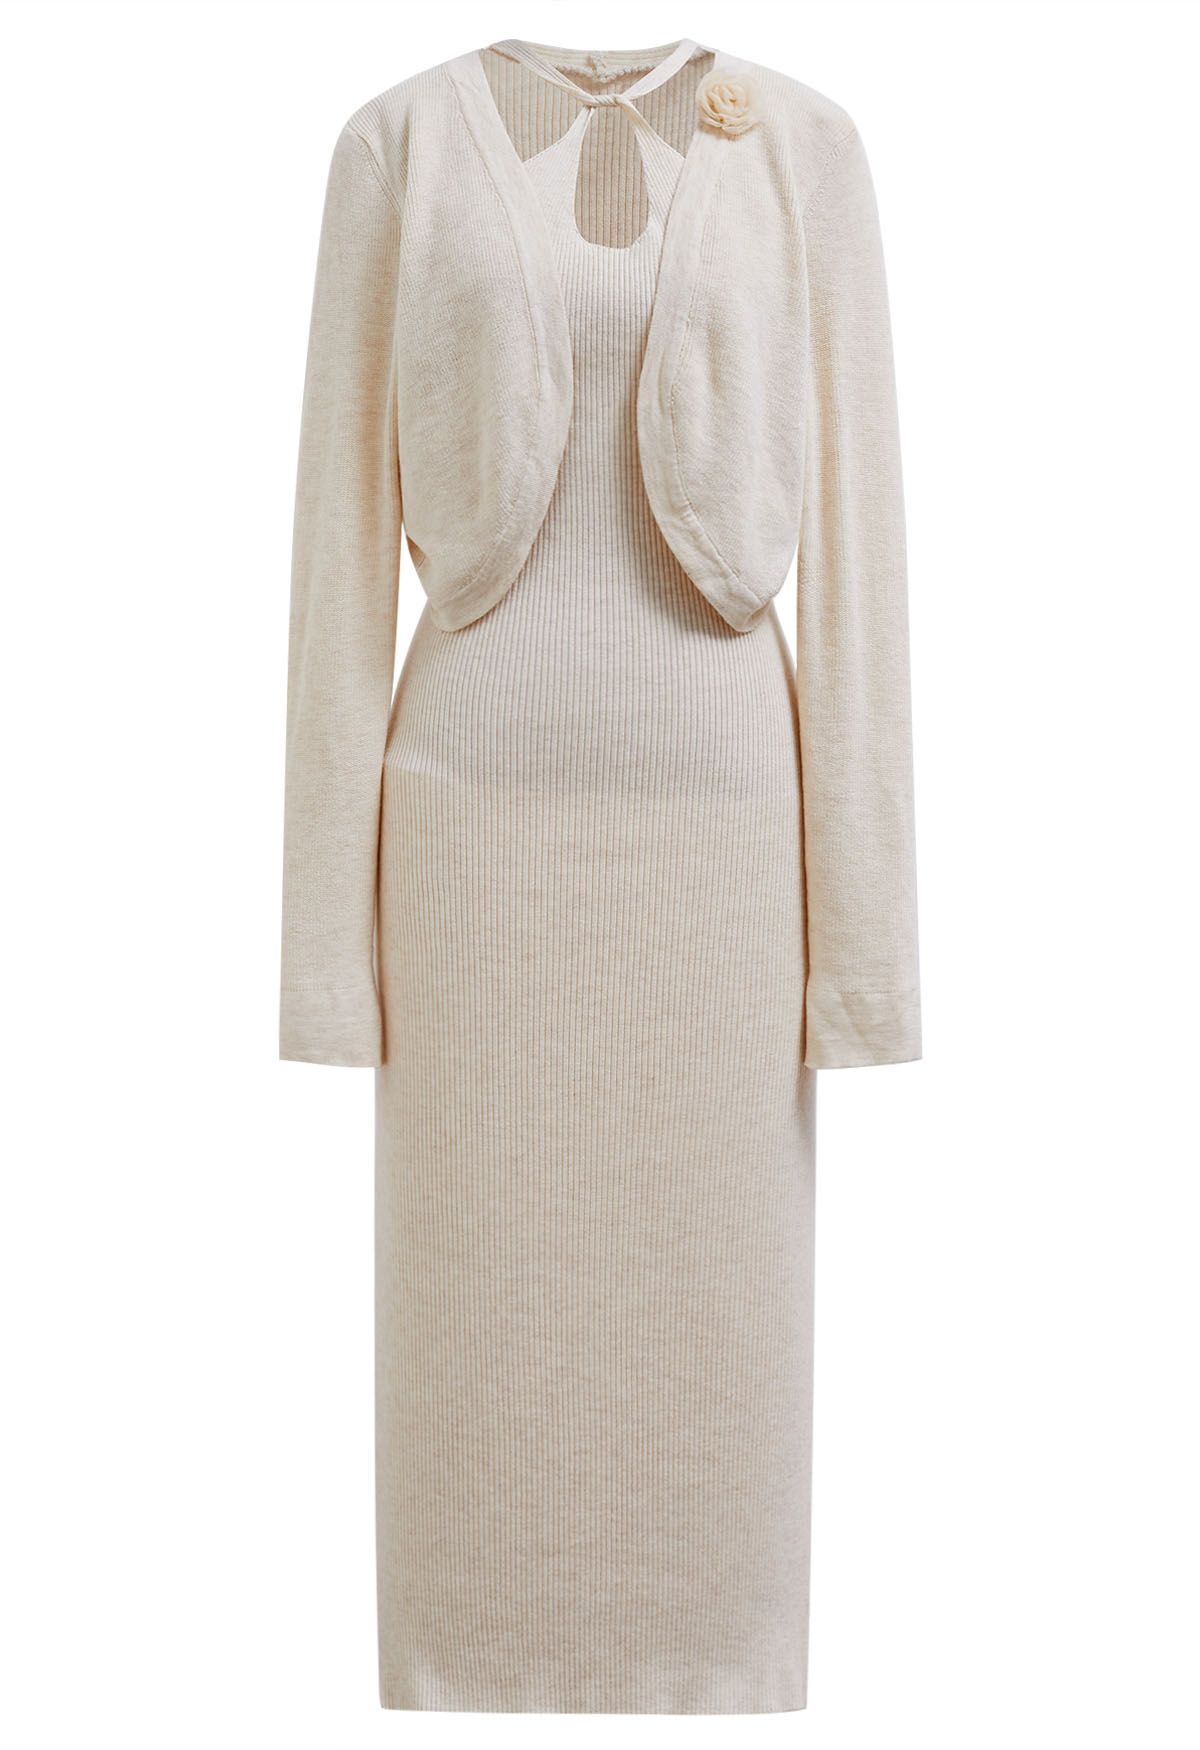 Cutout Halter Neck Knit Dress and Cardigan Set in Cream